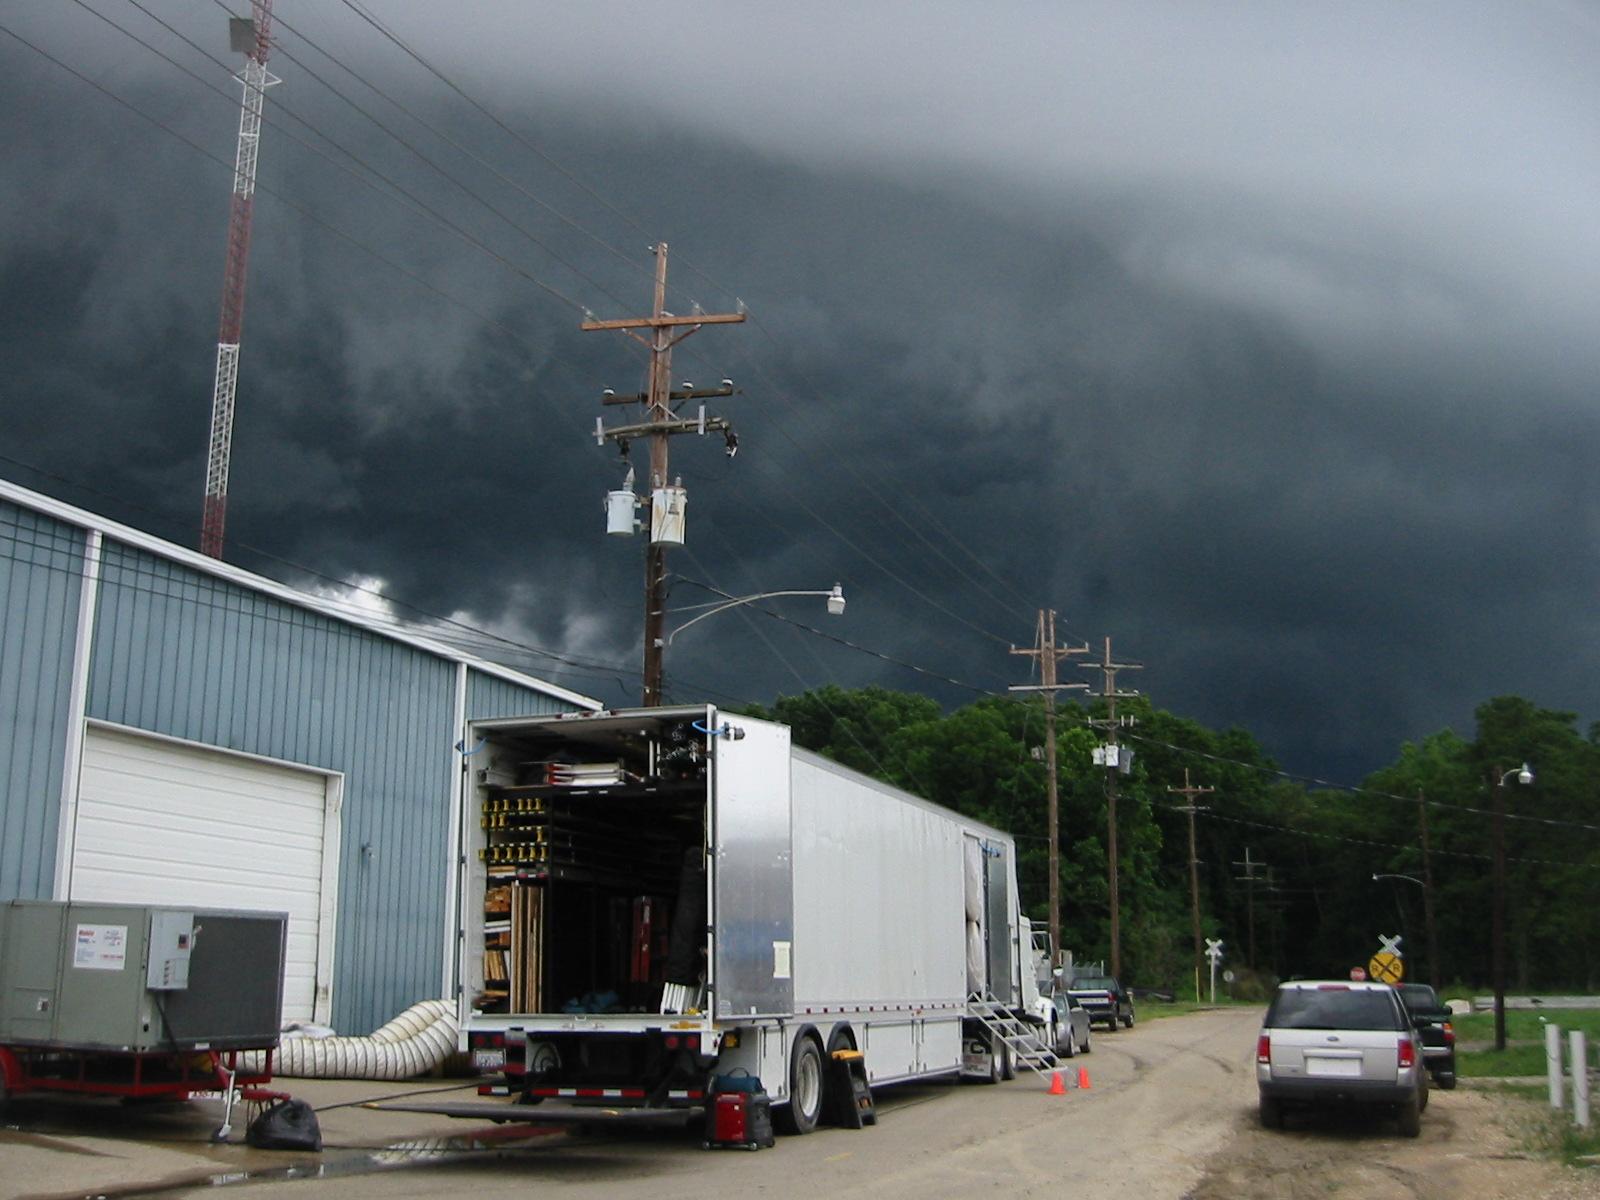 you know you have trouble when clouds look just like this, photo by the Bauman crew